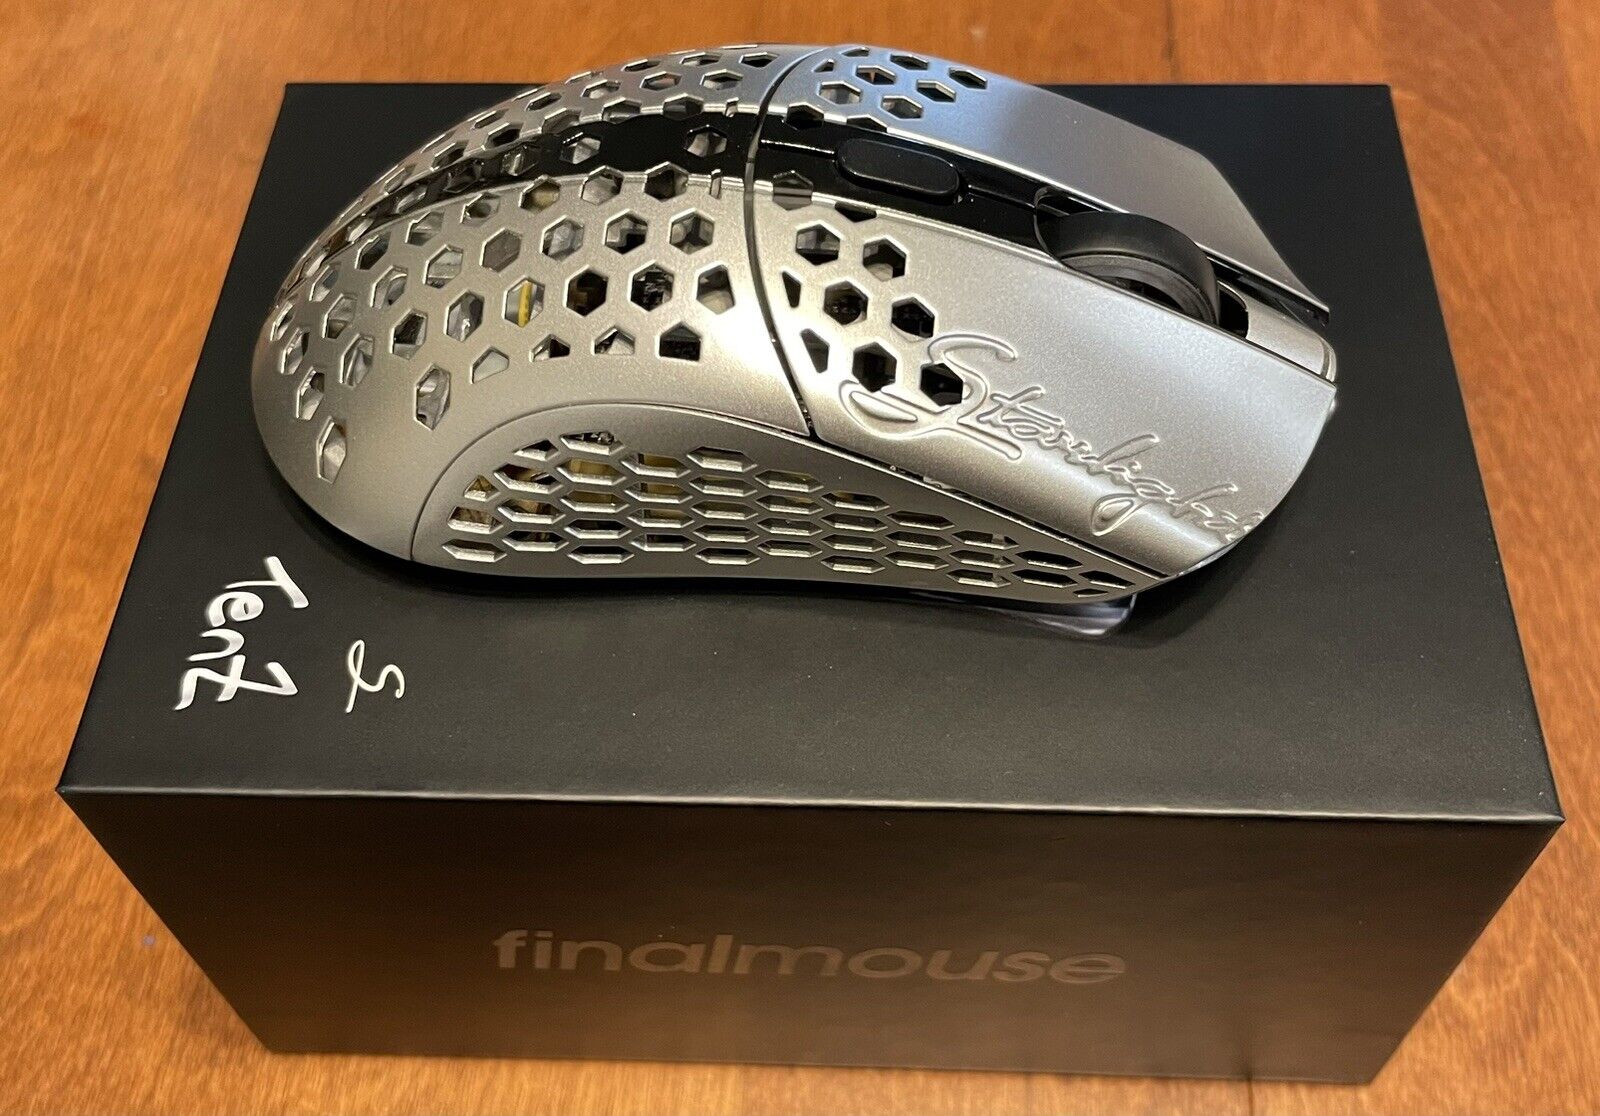 Finalmouse Starlight Pro TenZ Edition (Small) - GREAT CONDITION